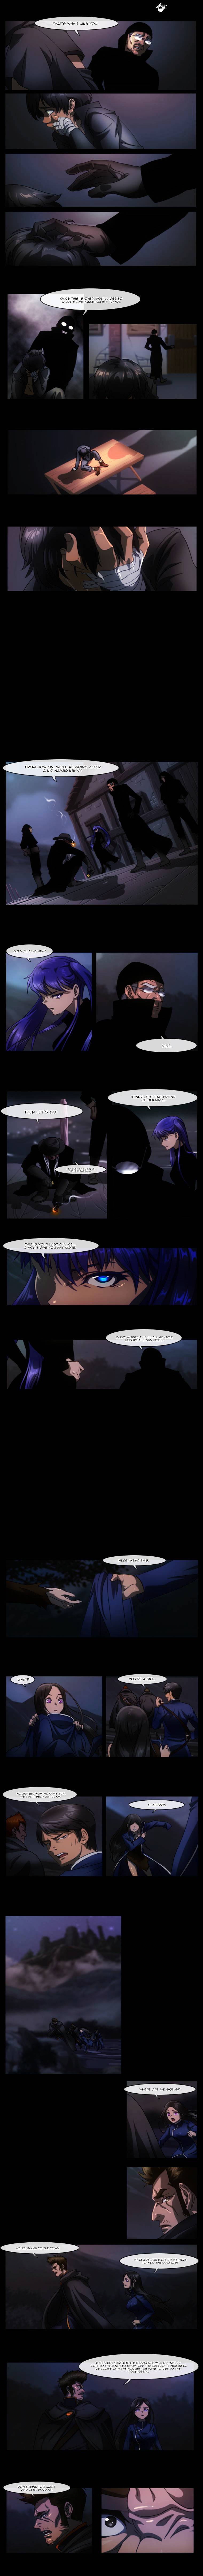 Over Steam - Page 3